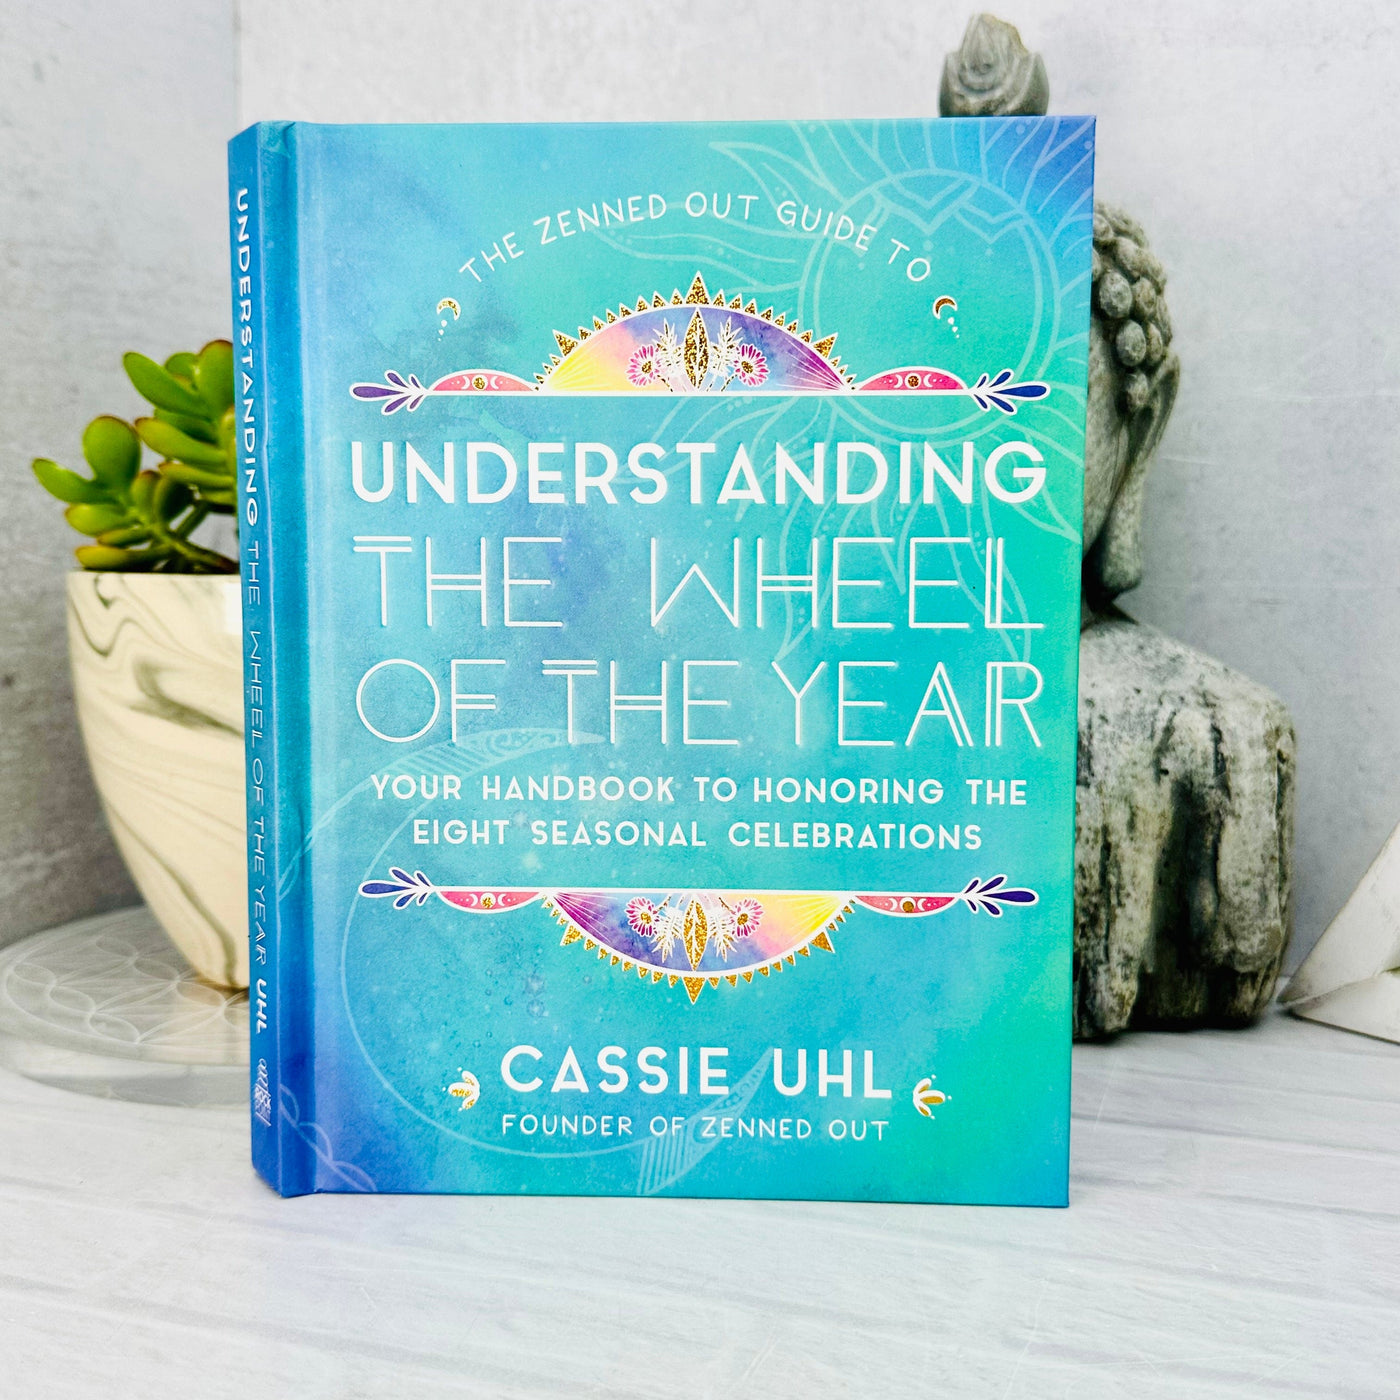 The Zenned Out Guide to Understanding The Wheel Of The Year - front of book view